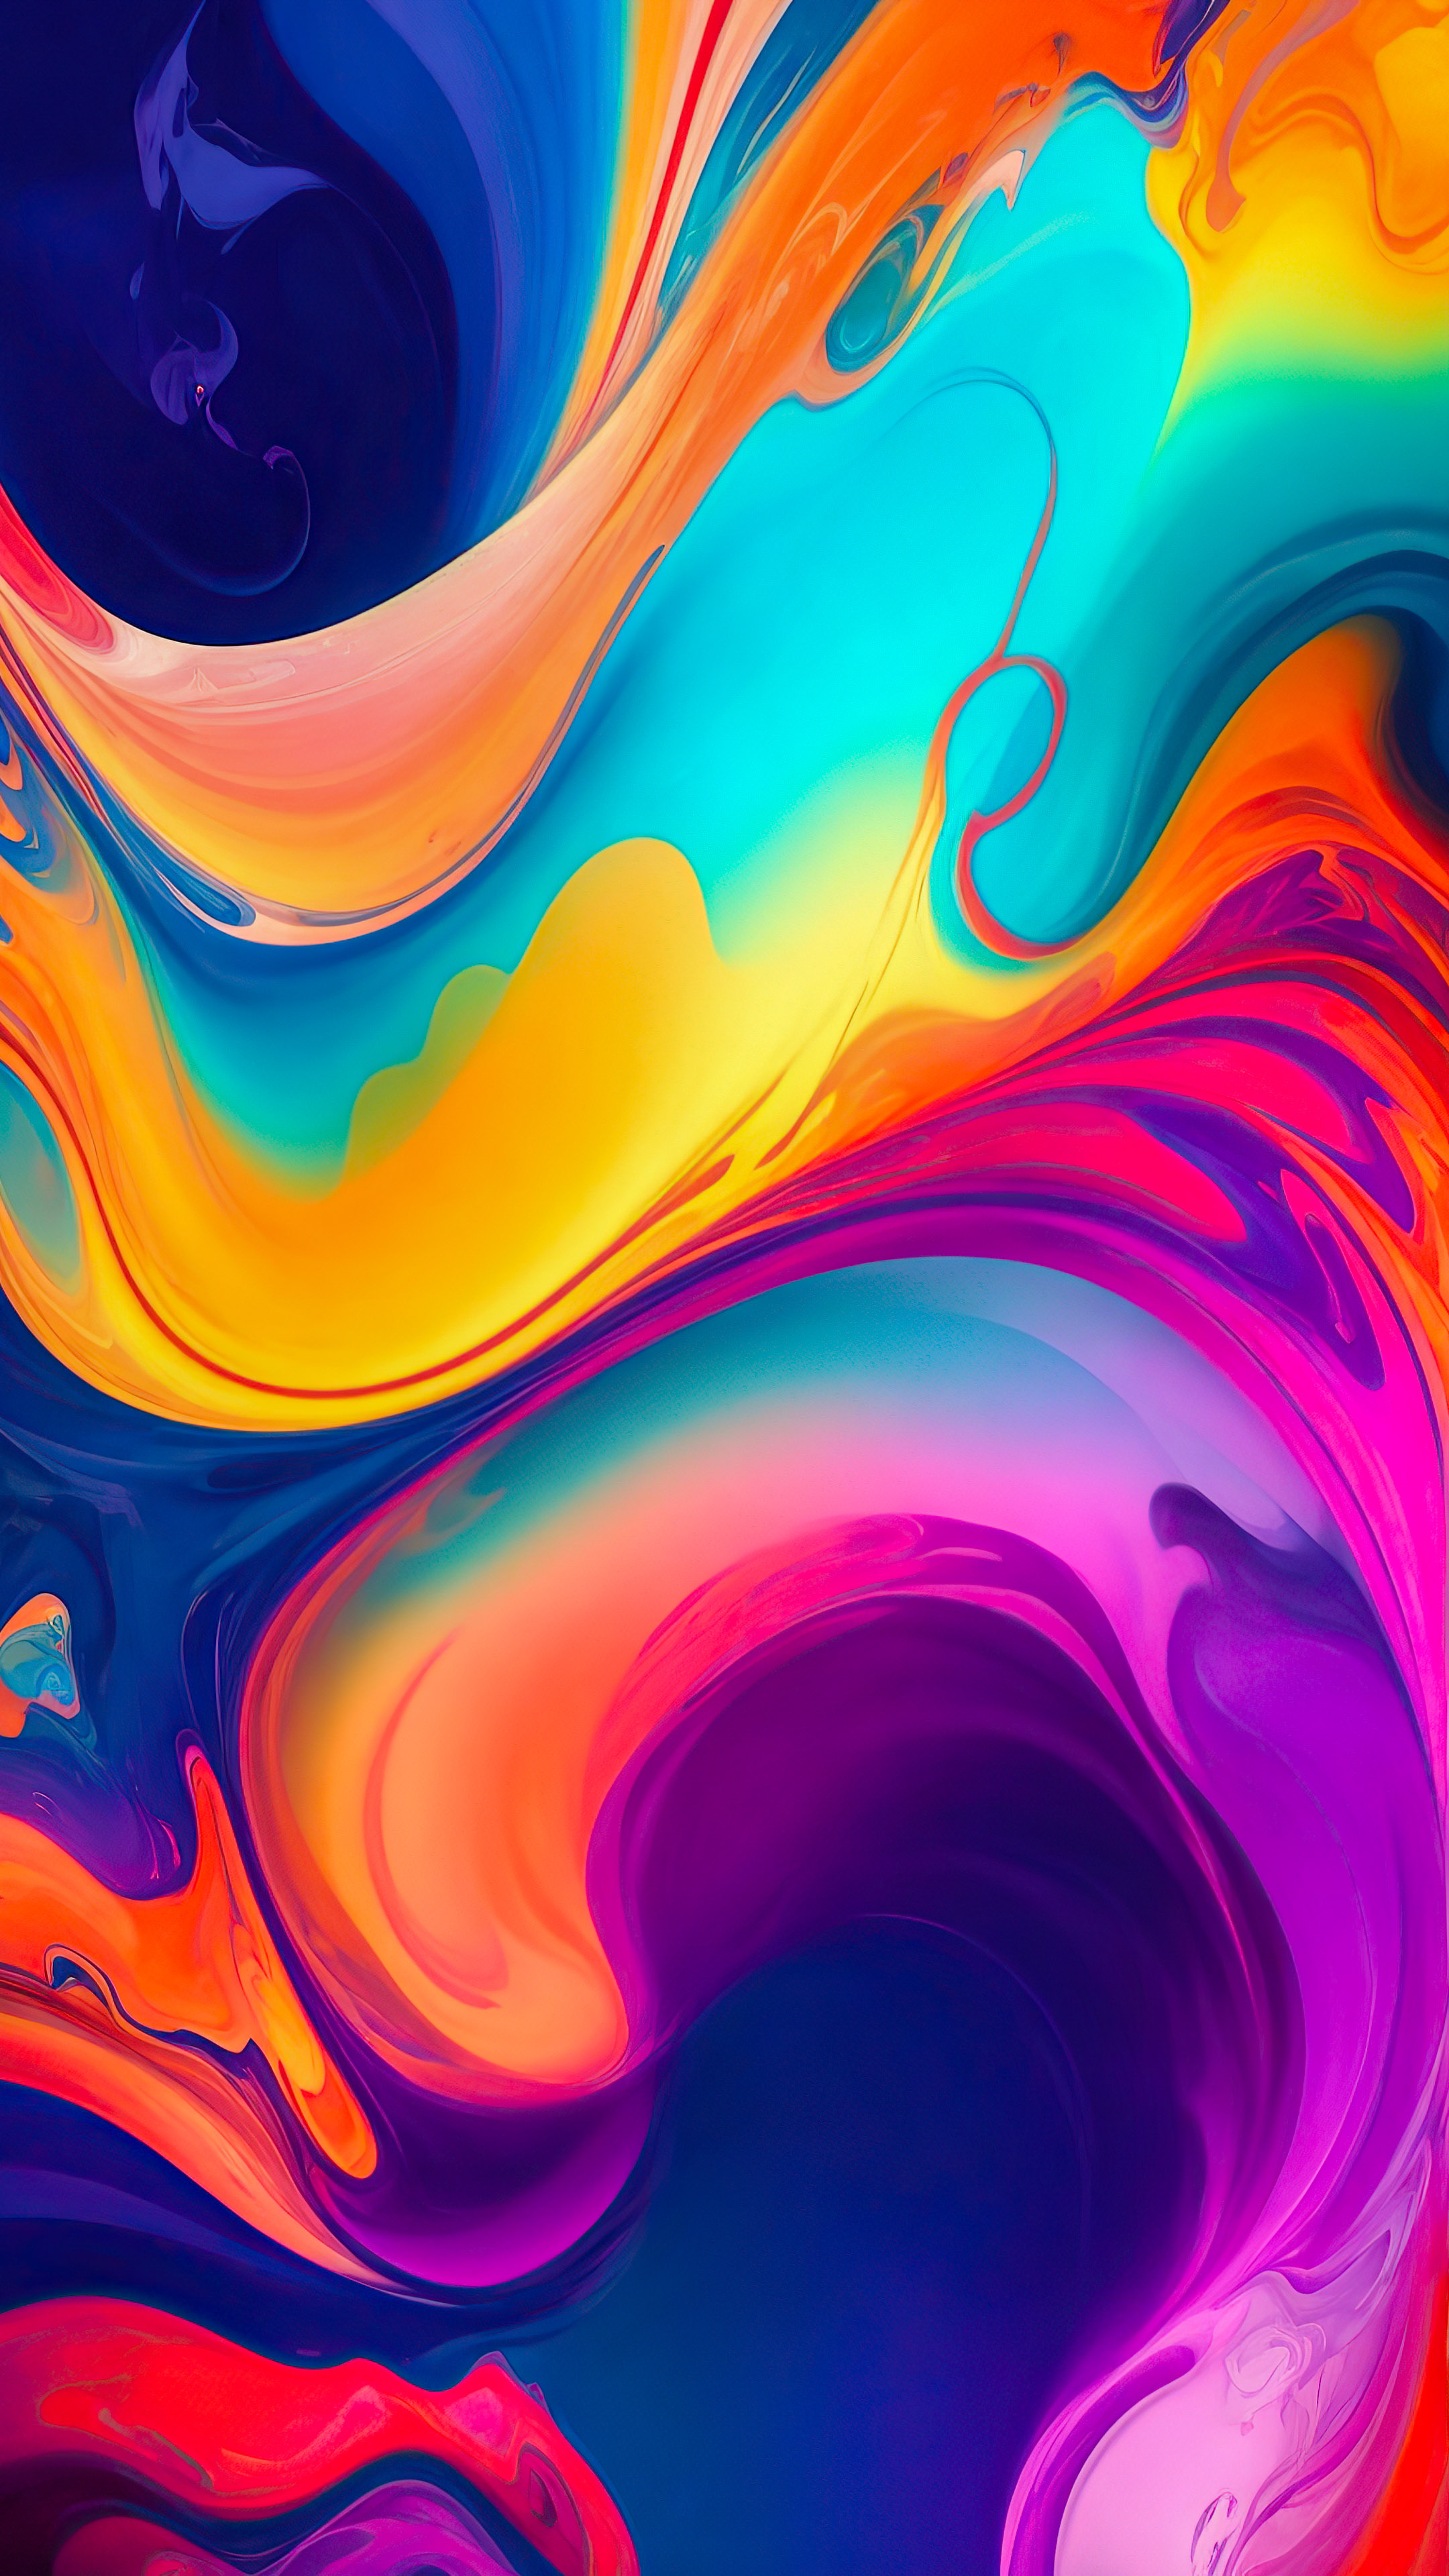 Explore chaotic and spiritual expressions through our phone abstract wallpaper in 4K, featuring complex and colorful works.